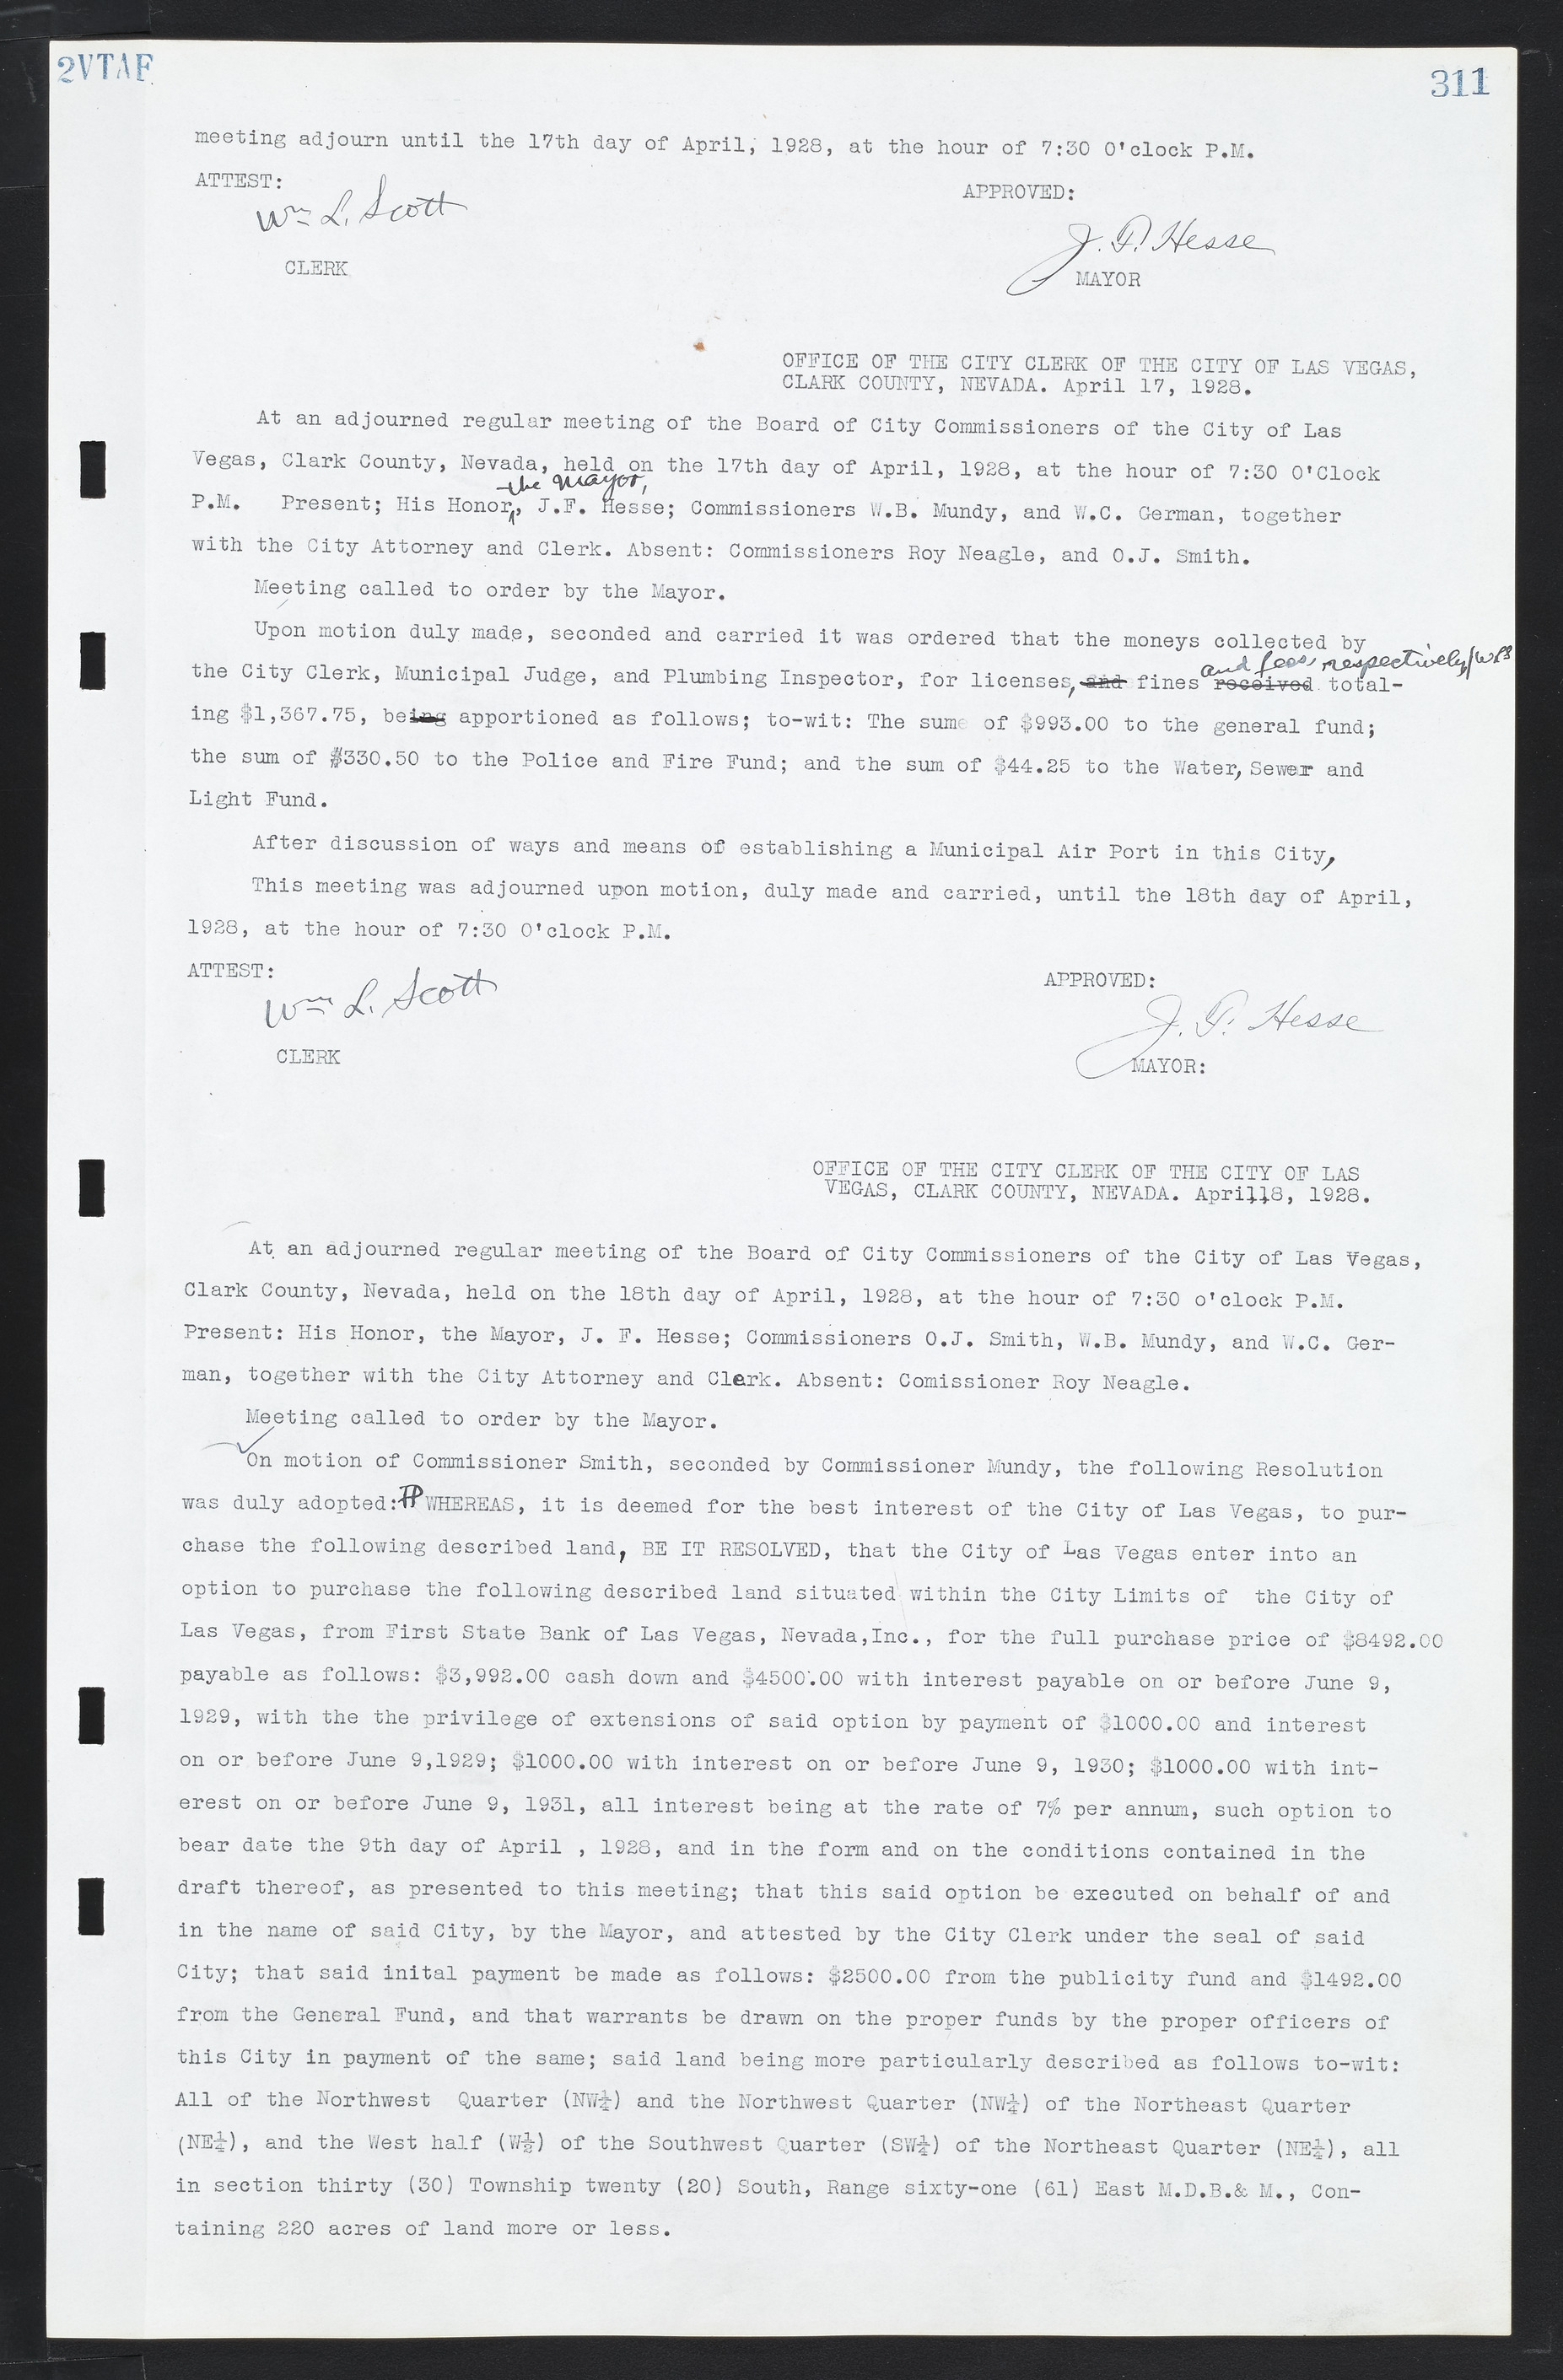 Las Vegas City Commission Minutes, March 1, 1922 to May 10, 1929, lvc000002-320